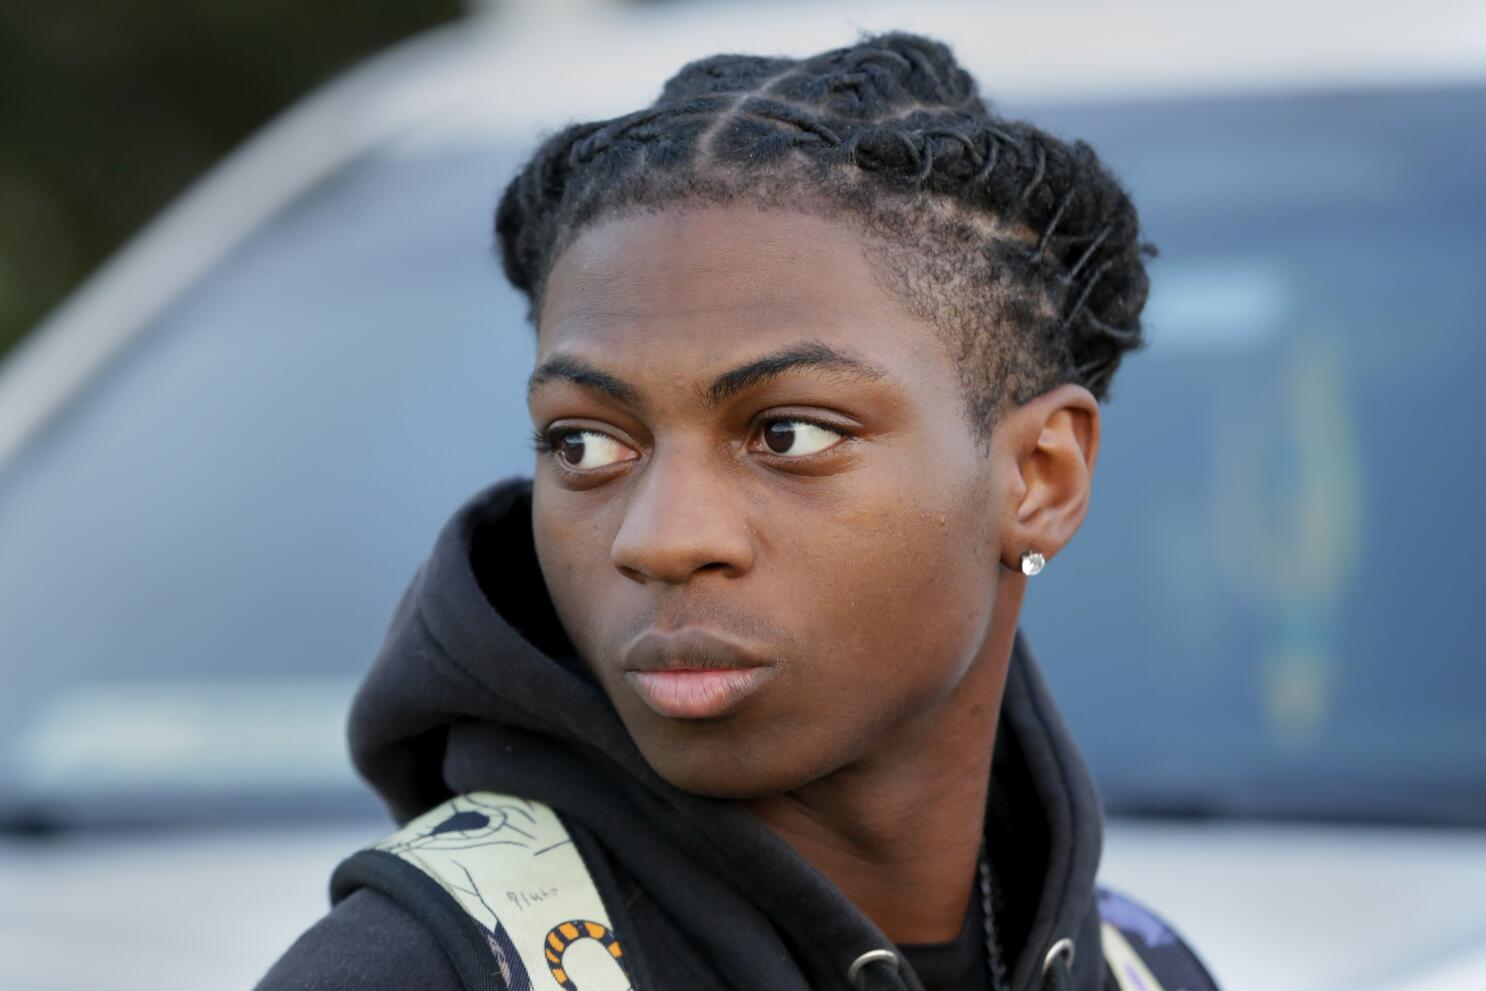 A Black student was suspended for his hairstyle. The school says it wasn't  discrimination - The San Diego Union-Tribune